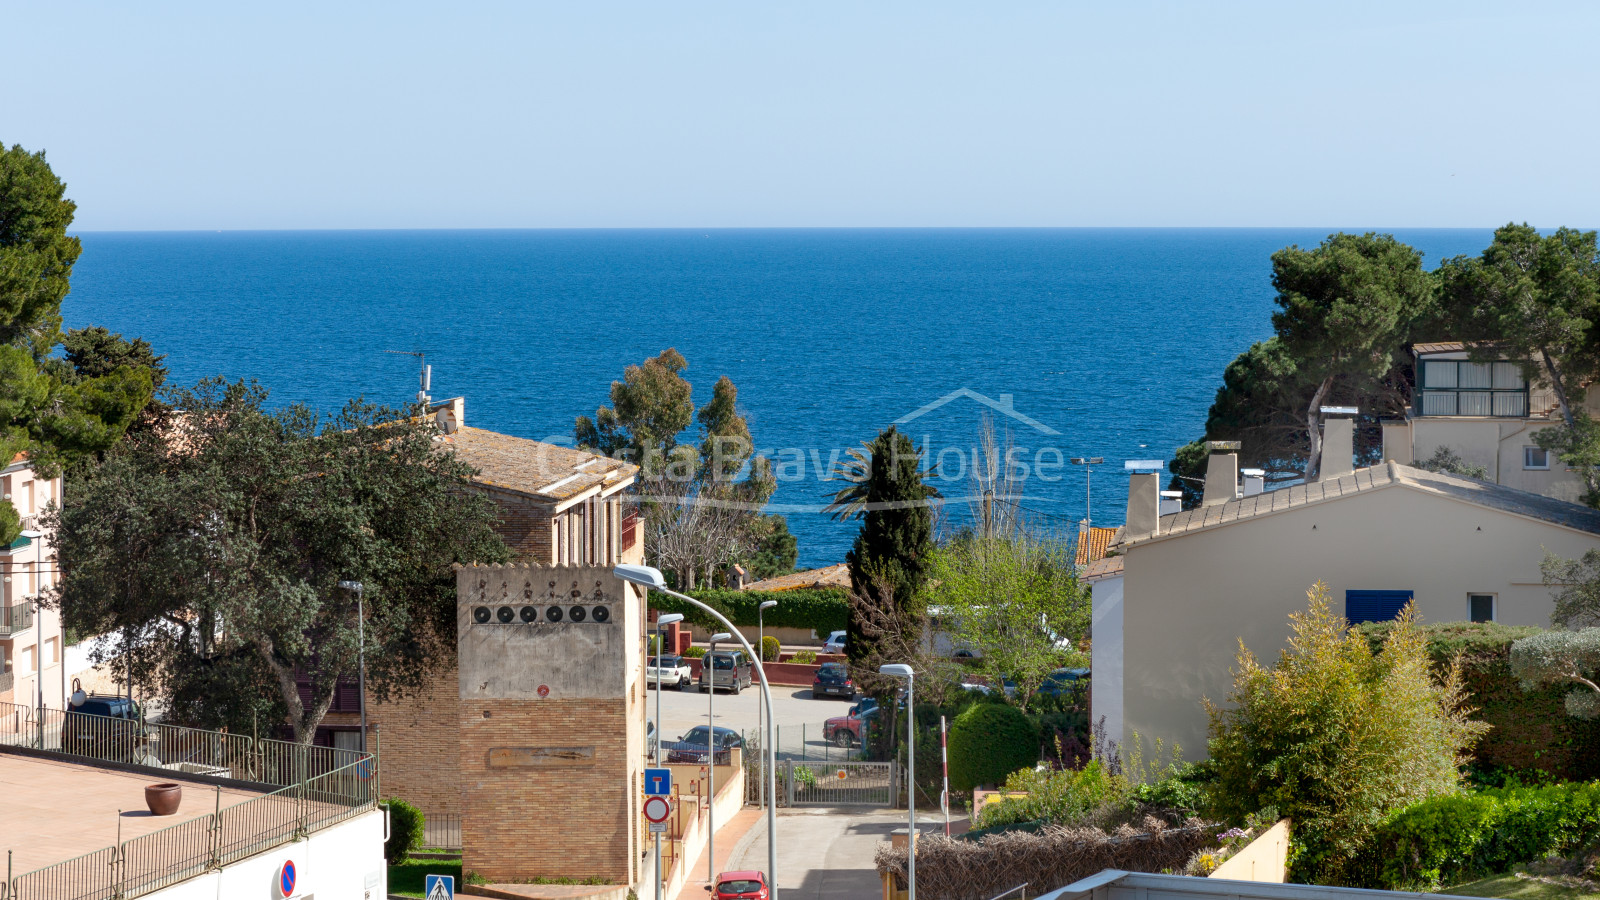 Apartment with sea view for sale in Calella Palafrugell, 250 m from the Port Pelegrí beach